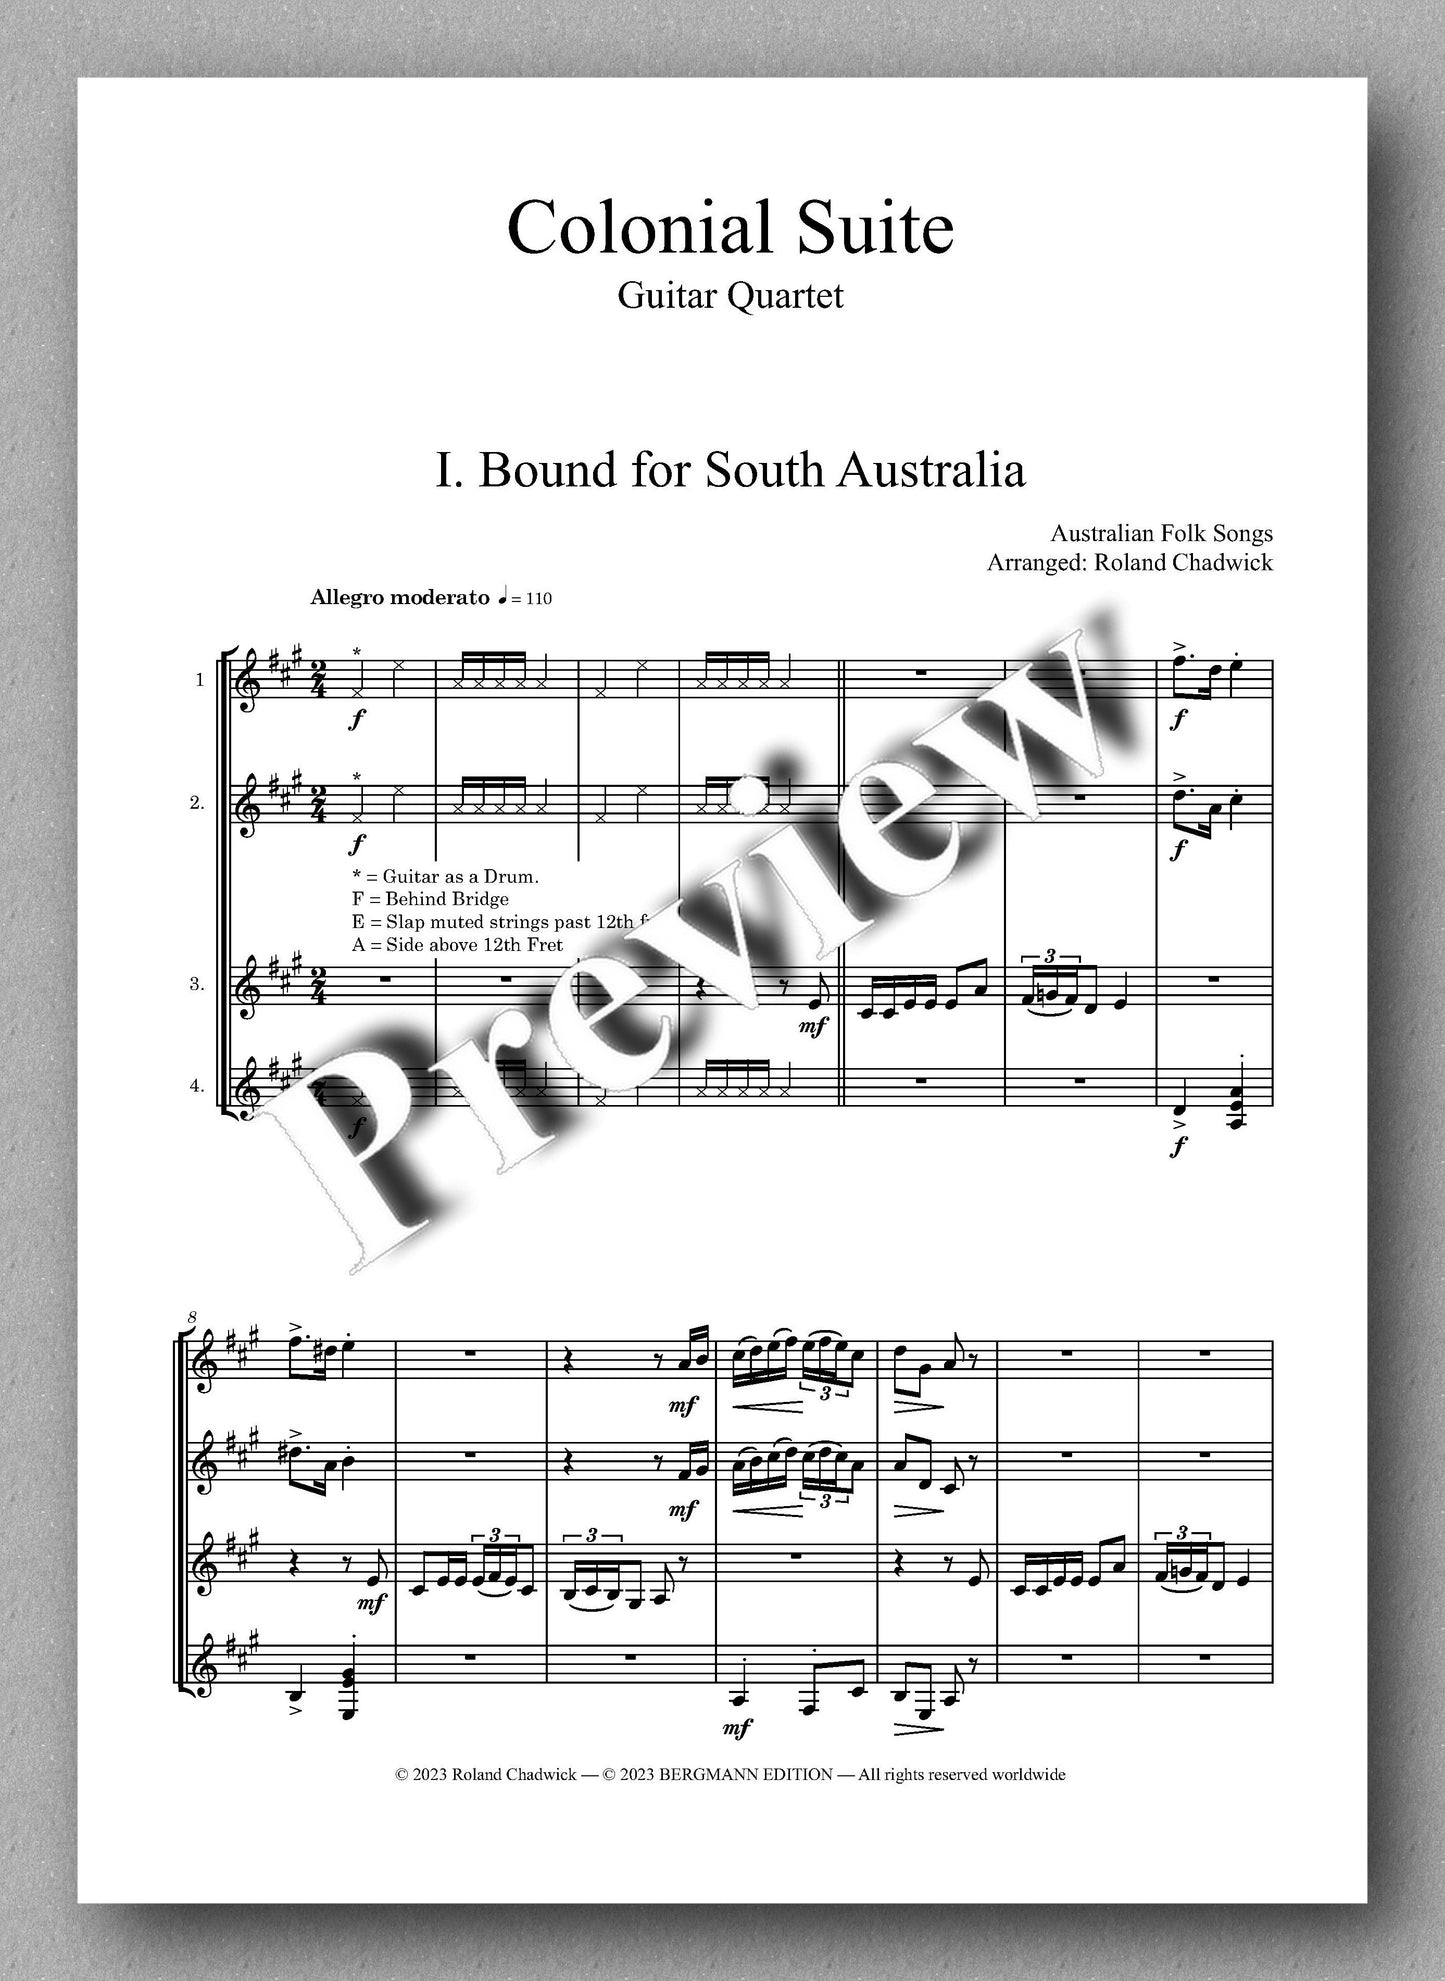 Roland Chadwick, Colonial Suite - preview of the music score 1